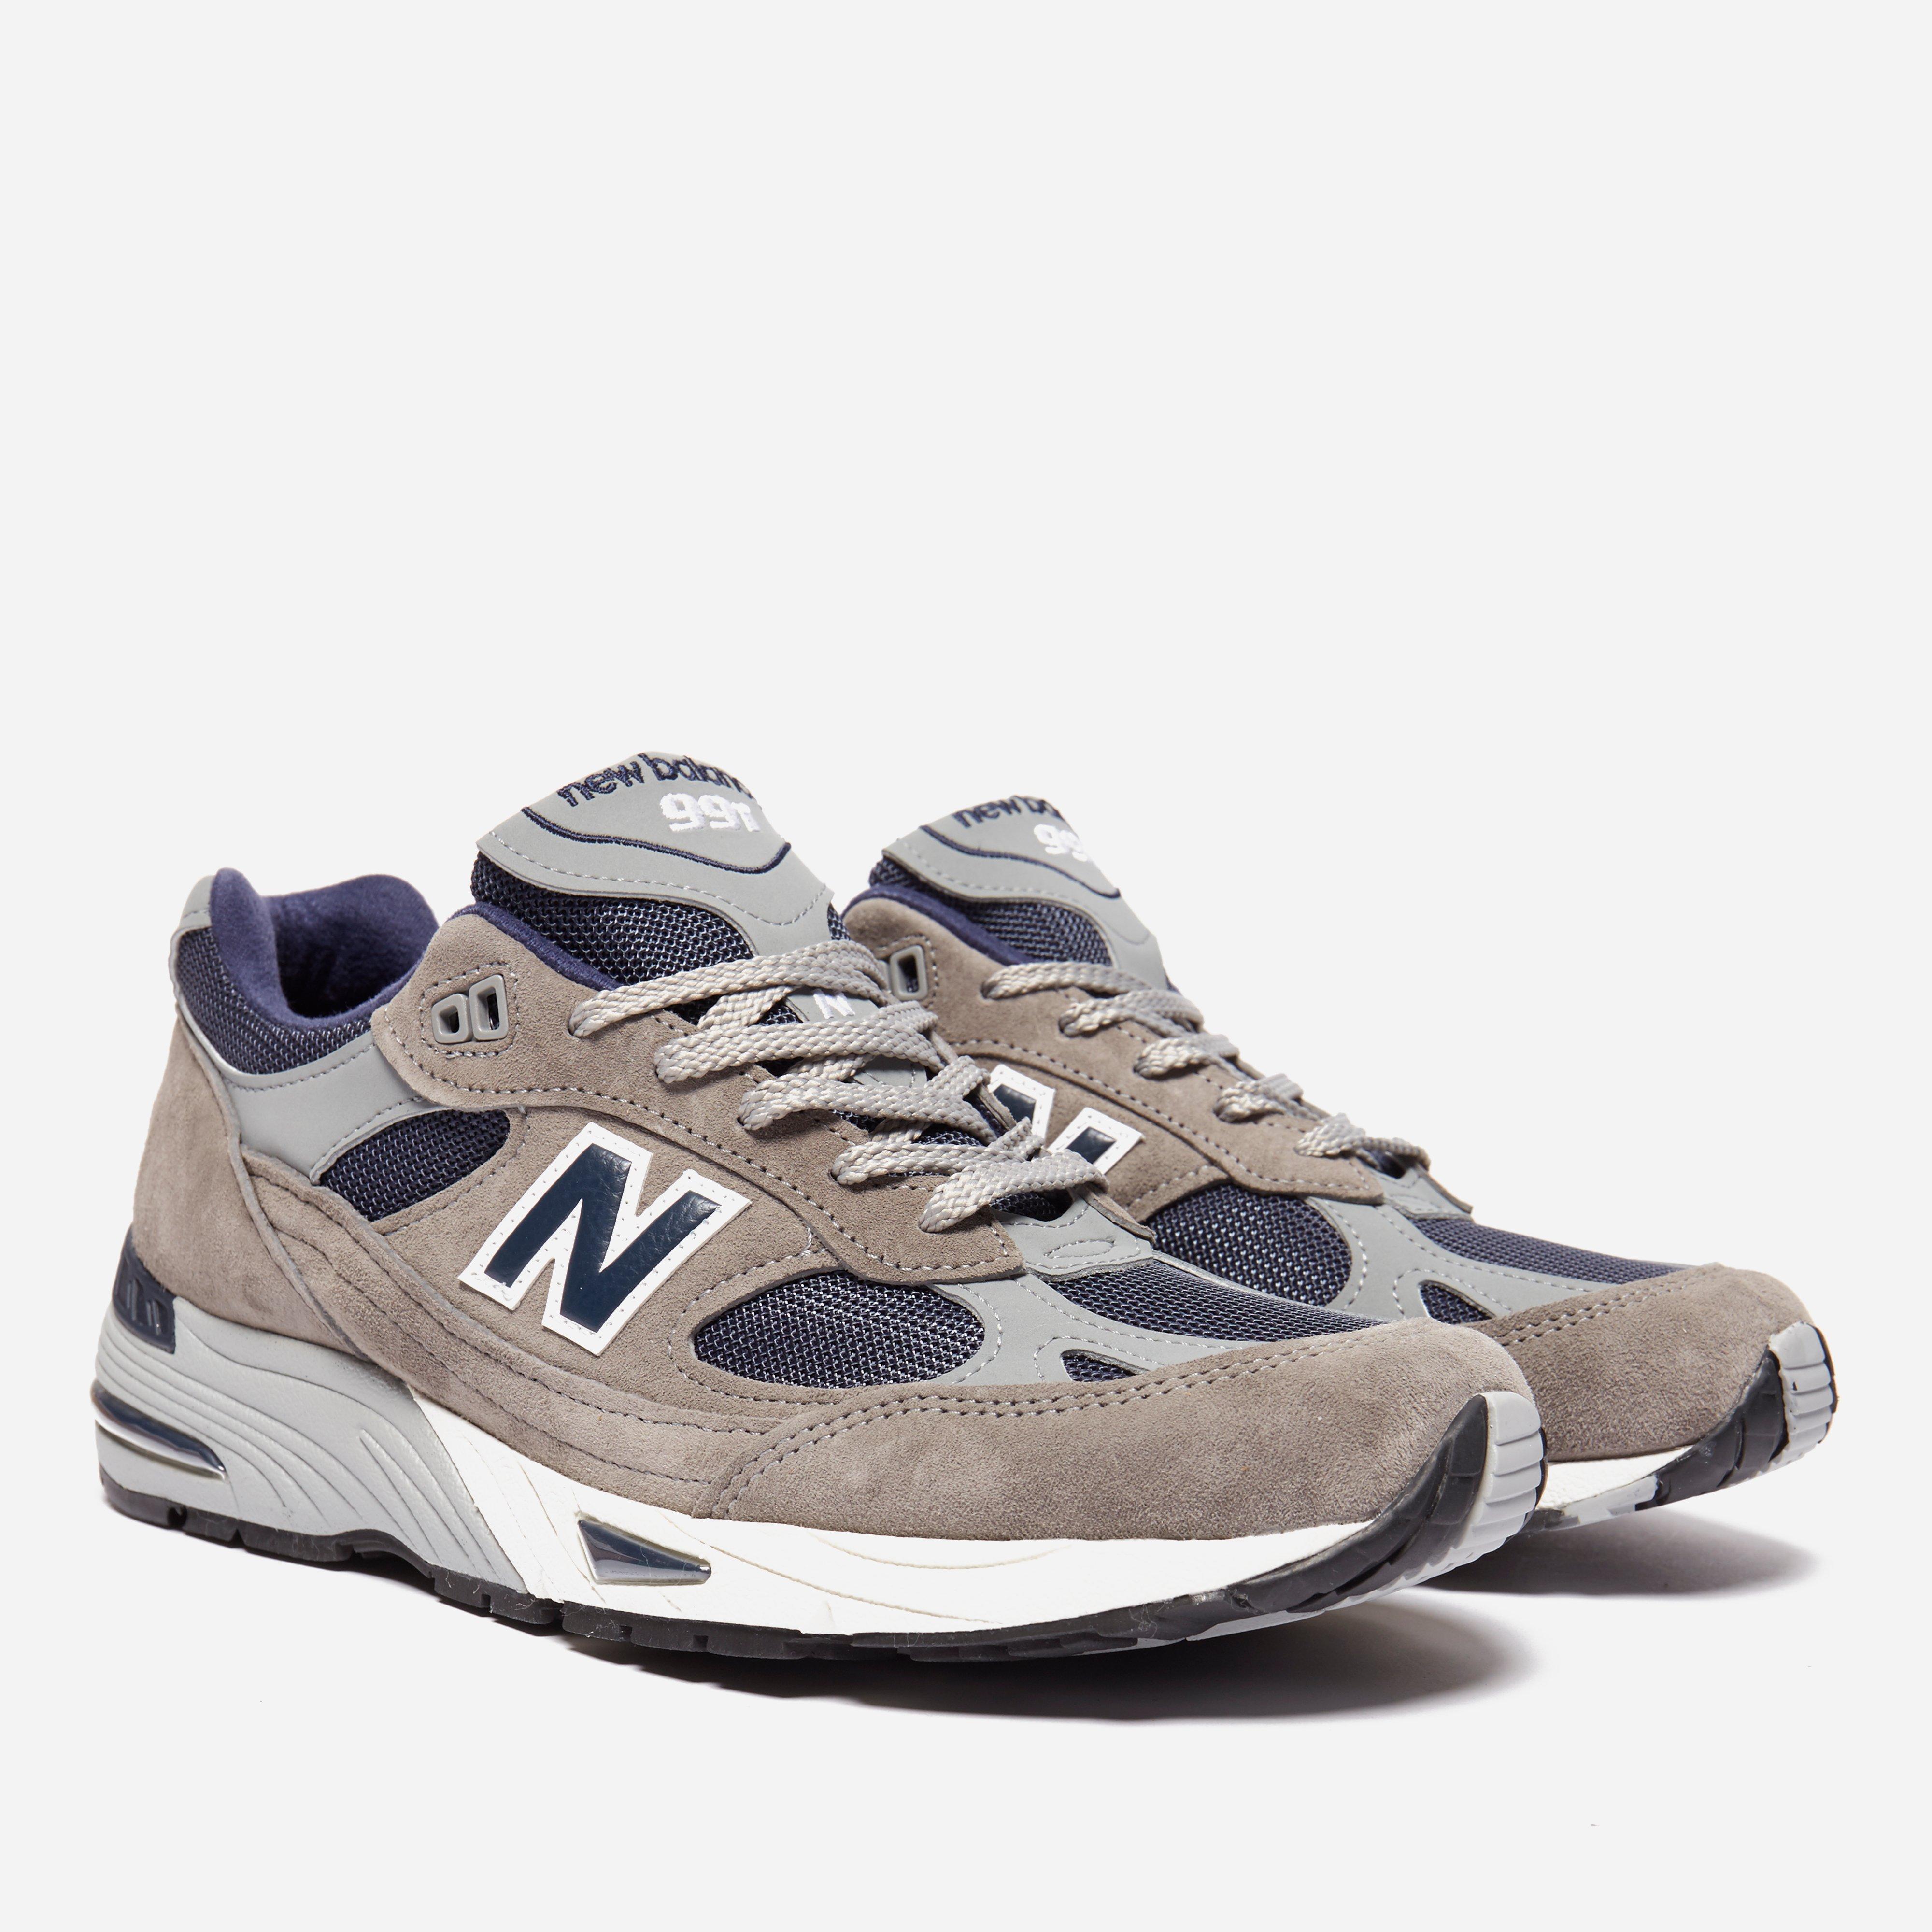 New Balance M 991 Ang Made In England in Grey (Grey) for Men - Lyst